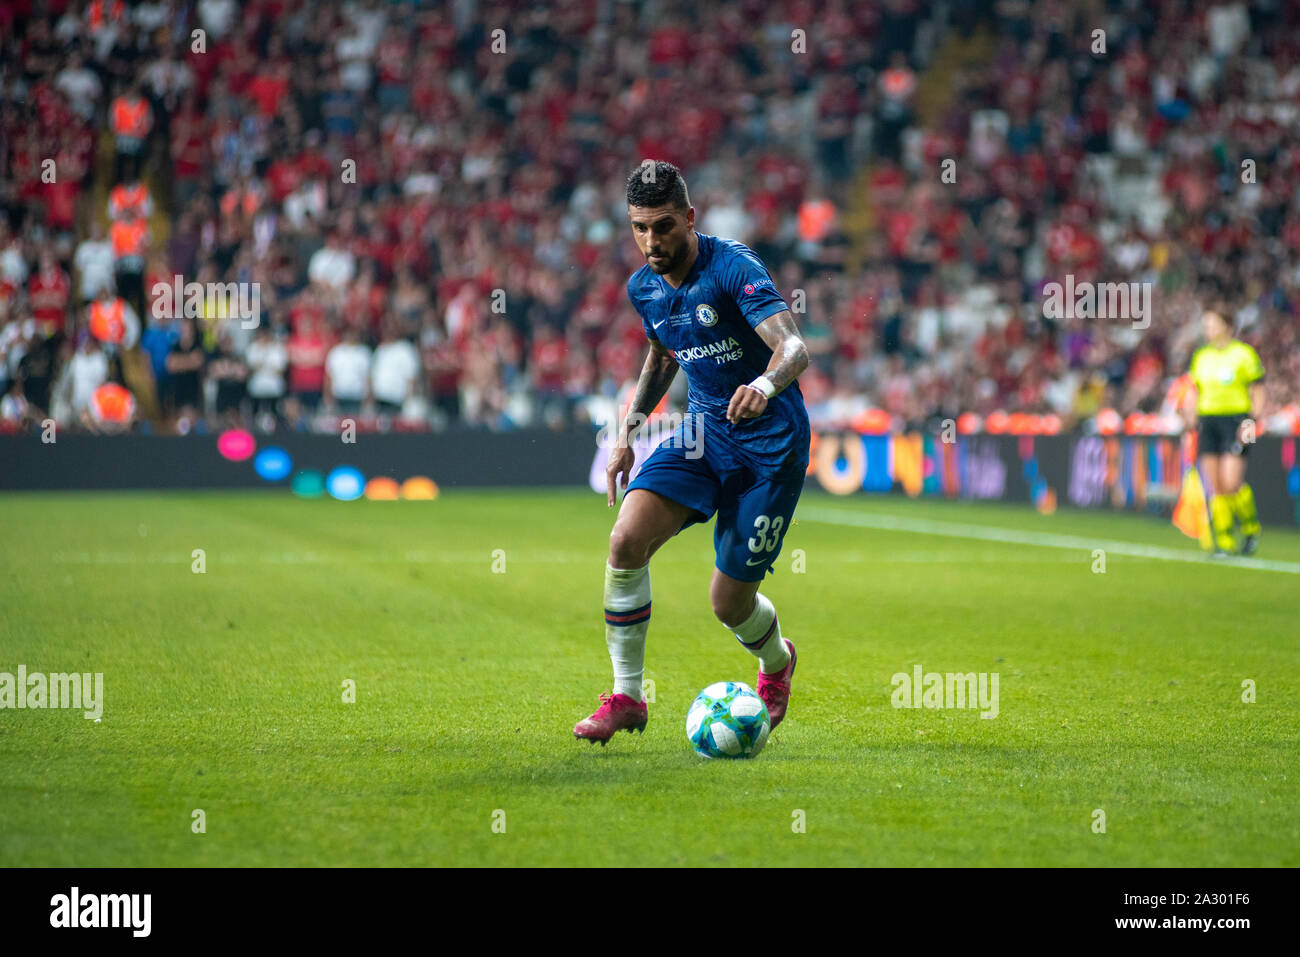 Istanbul, Turkey - August 14, 2019: Emerson during the UEFA Super Cup Finals match between Liverpool and Chelsea at Vodafone Arena Stock Photo